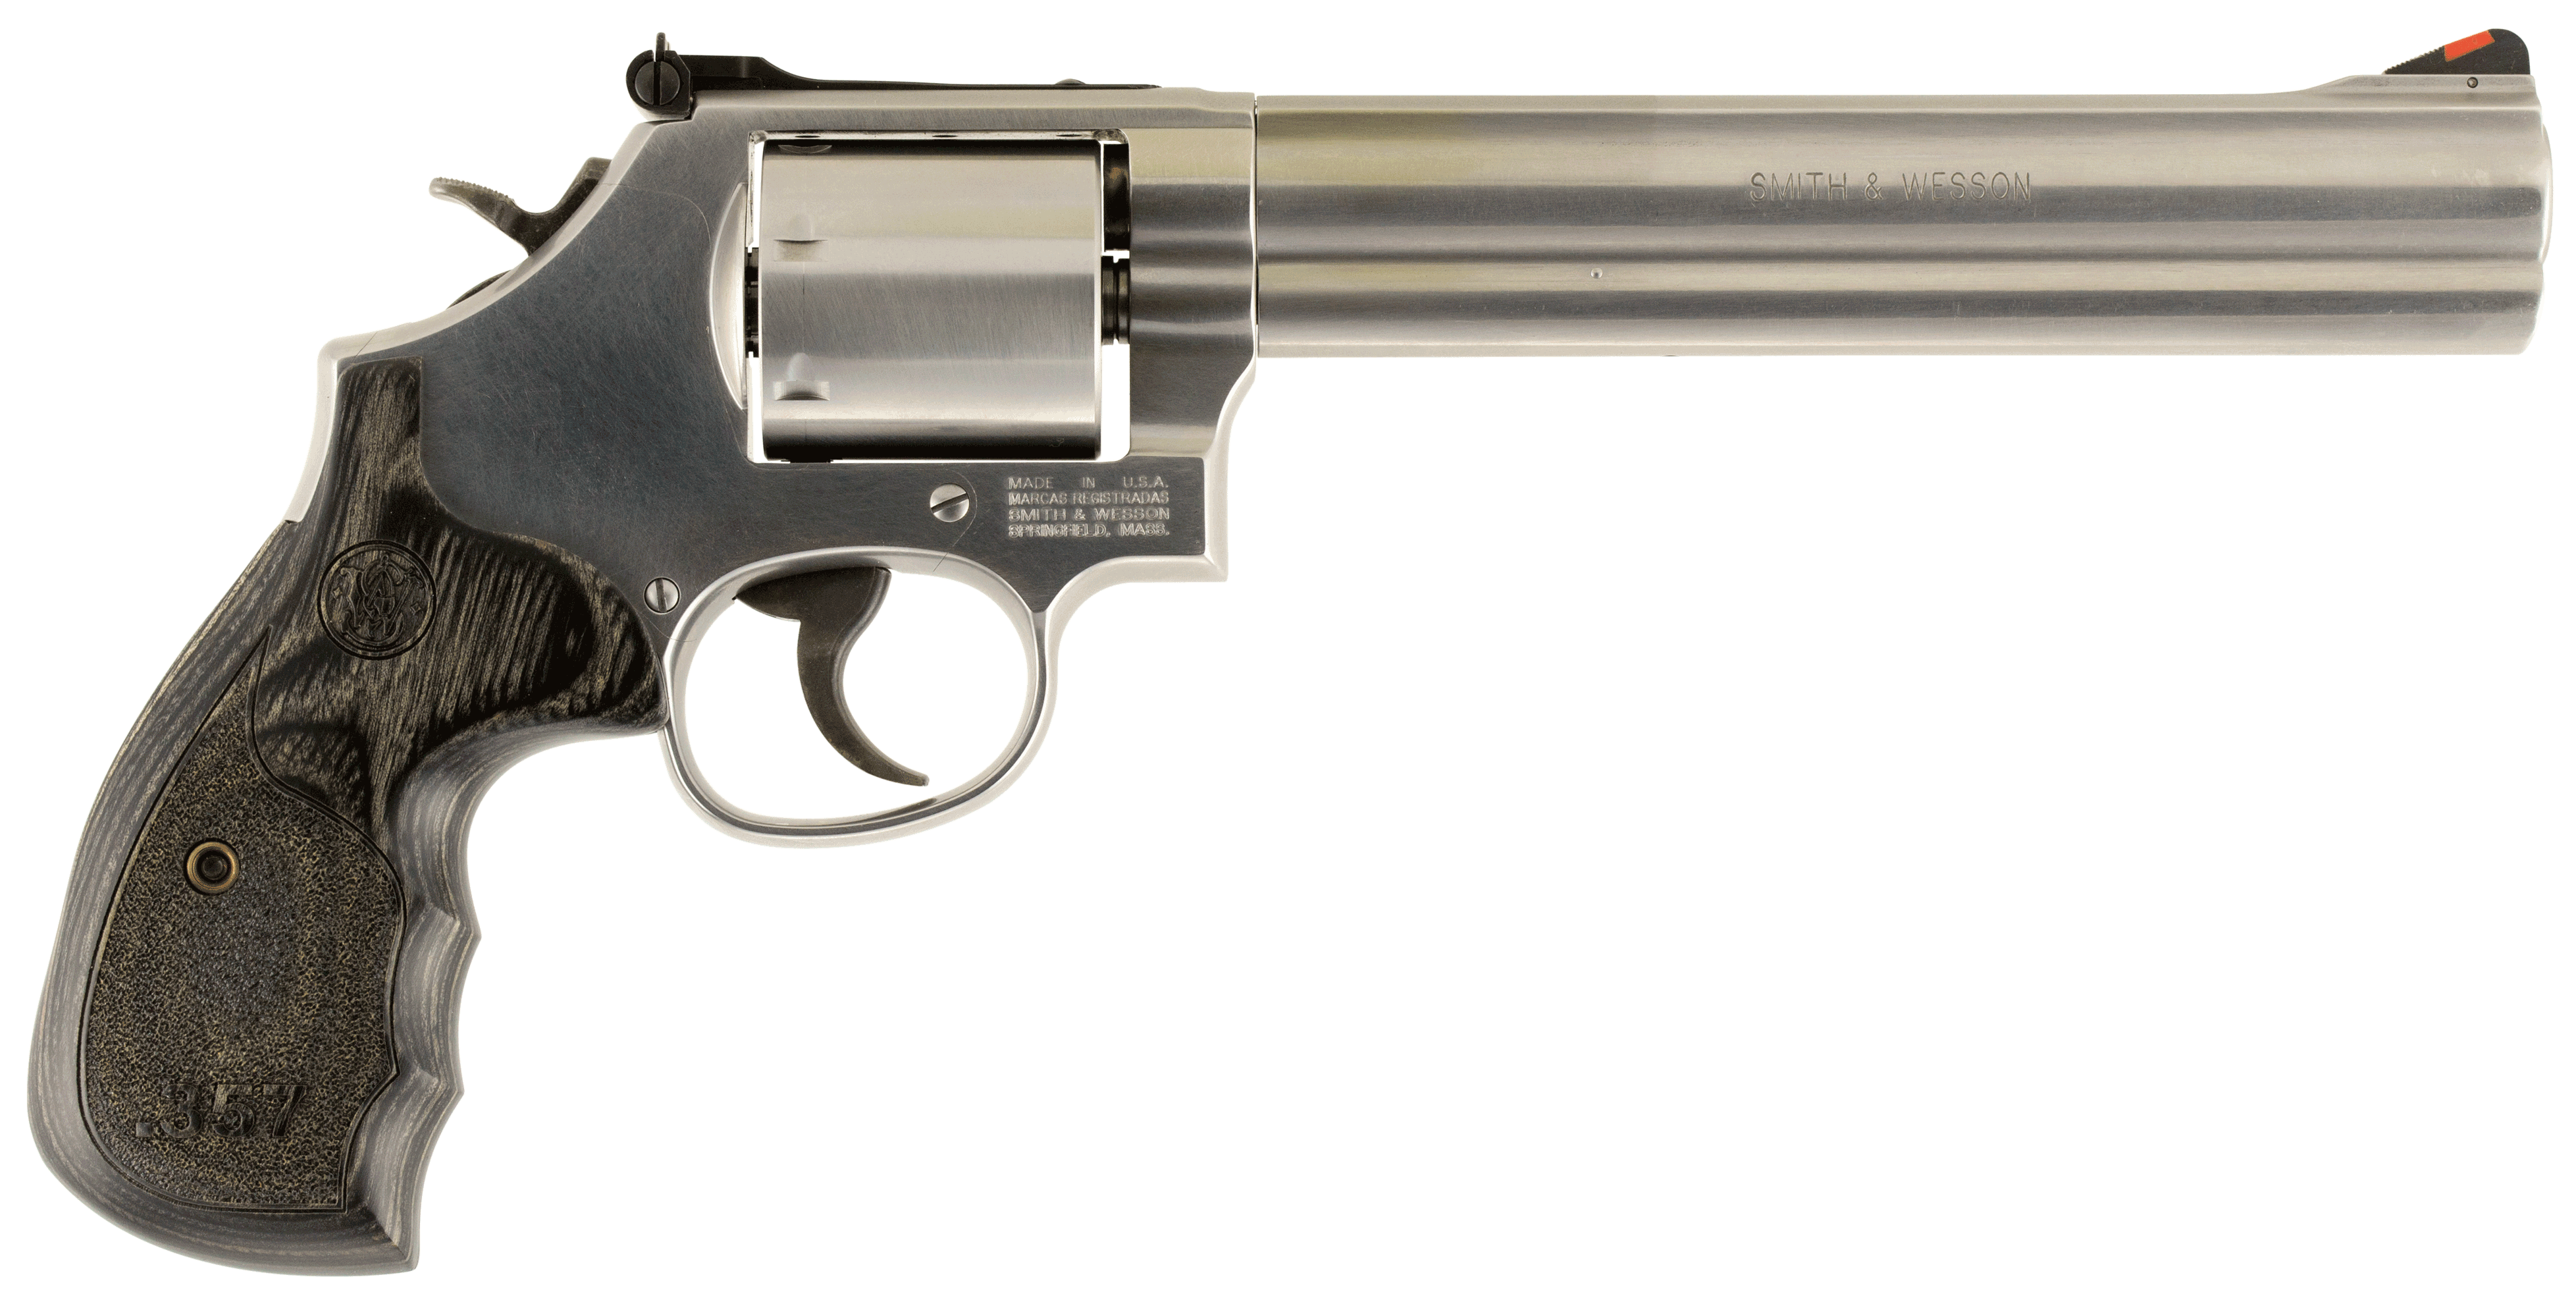 Smith And Wesson 150855 Model 686 Plus 357 Mag Or 38 Sandw Spl P Stainless Steel 7 Barrel And 7rd